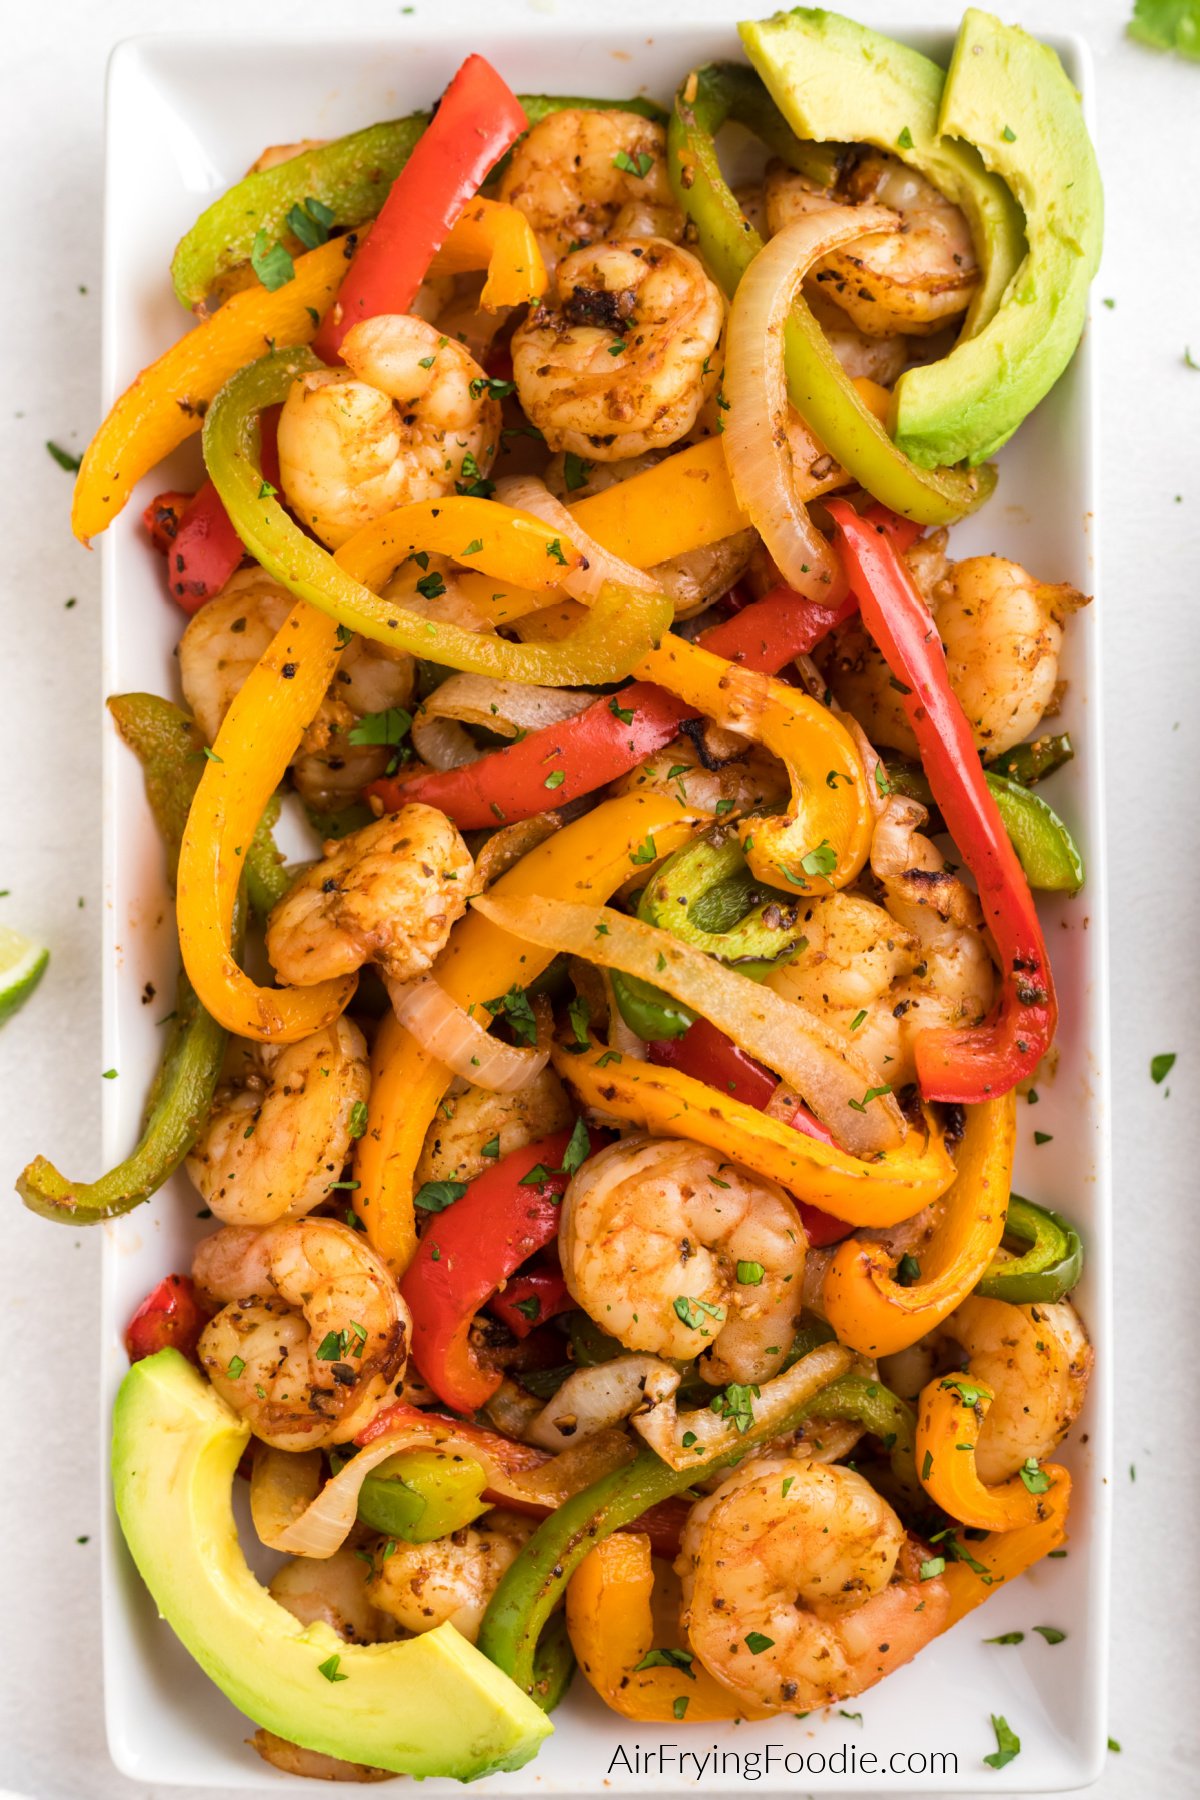 Tray full of shrimp fajitas made with shrimp, onion, and bell peppers  in the air fryer and ready to serve.